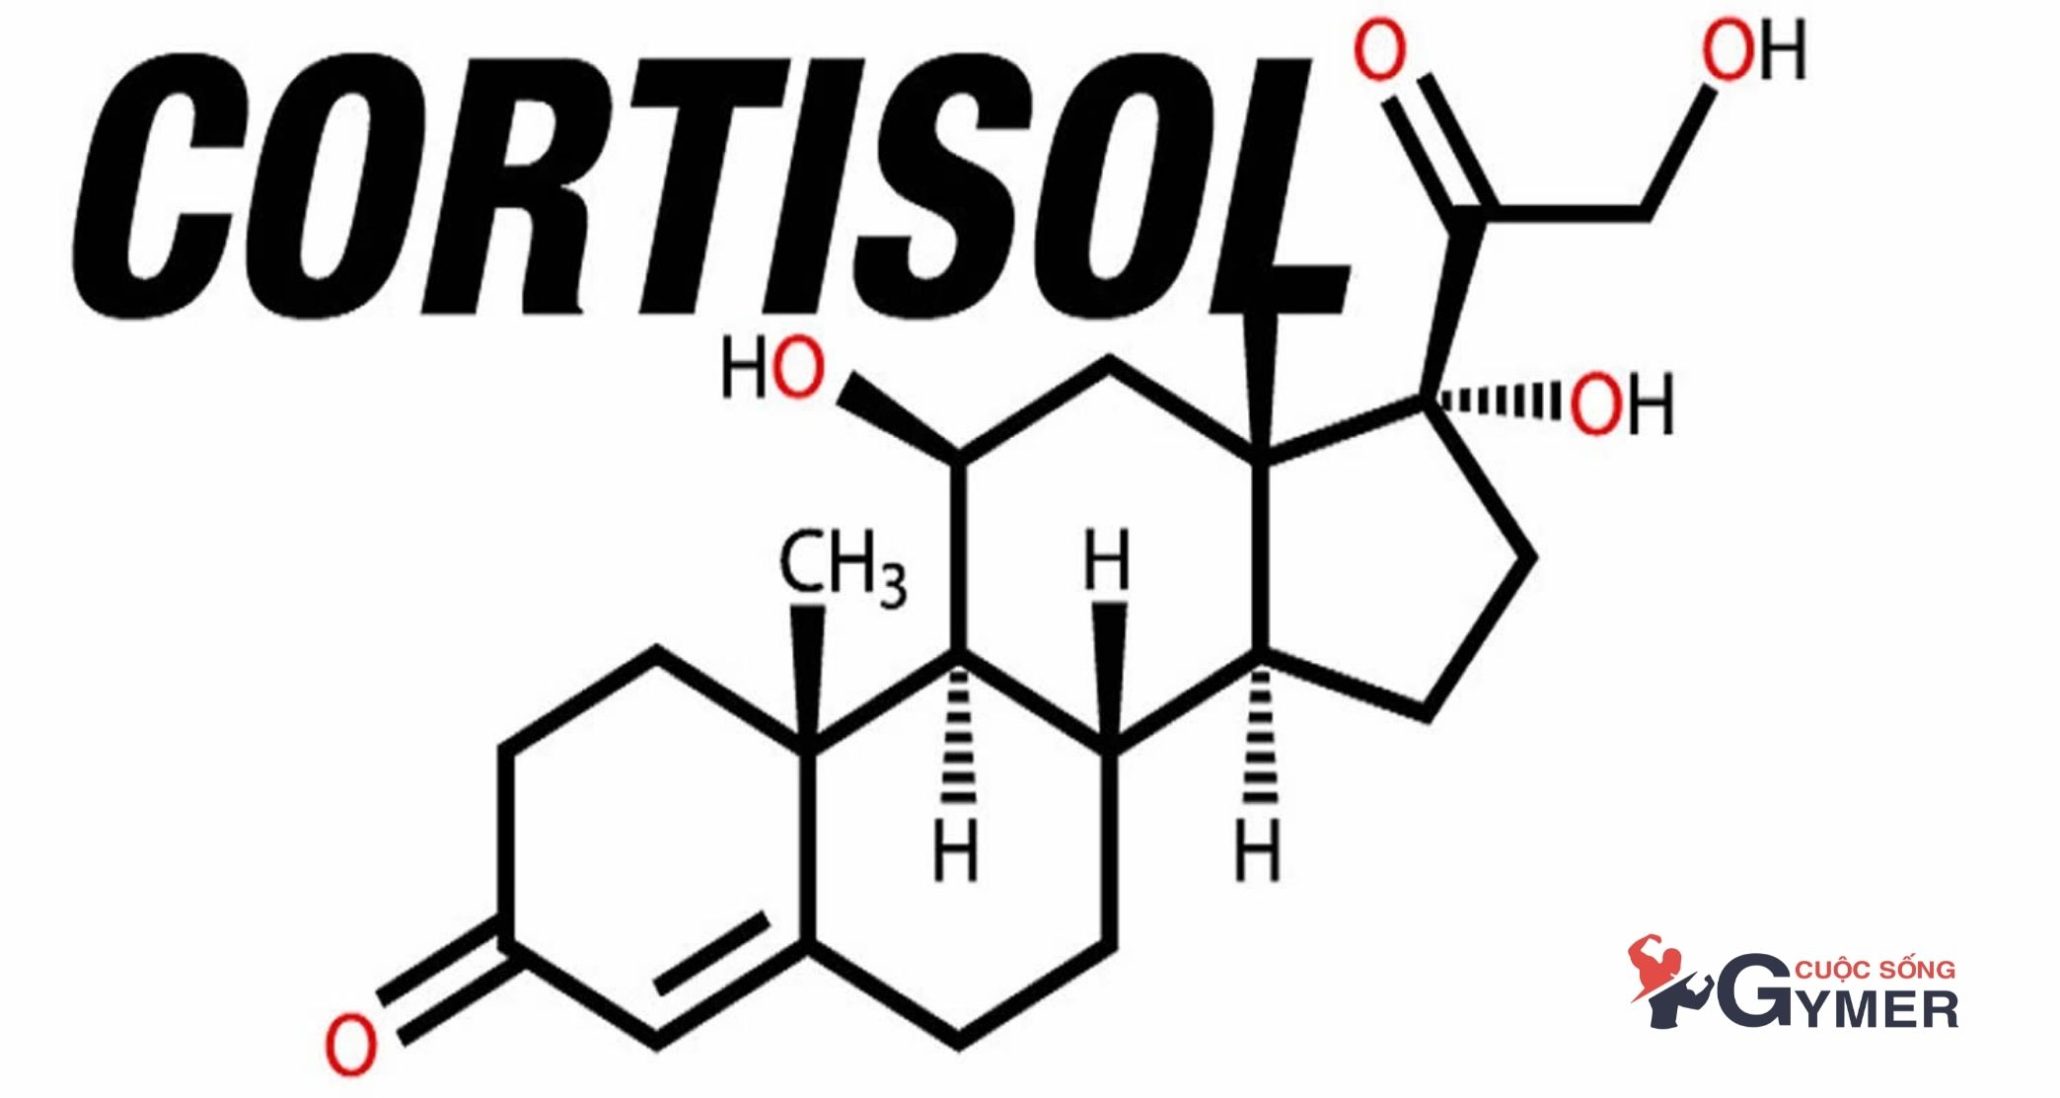 "Cortisol